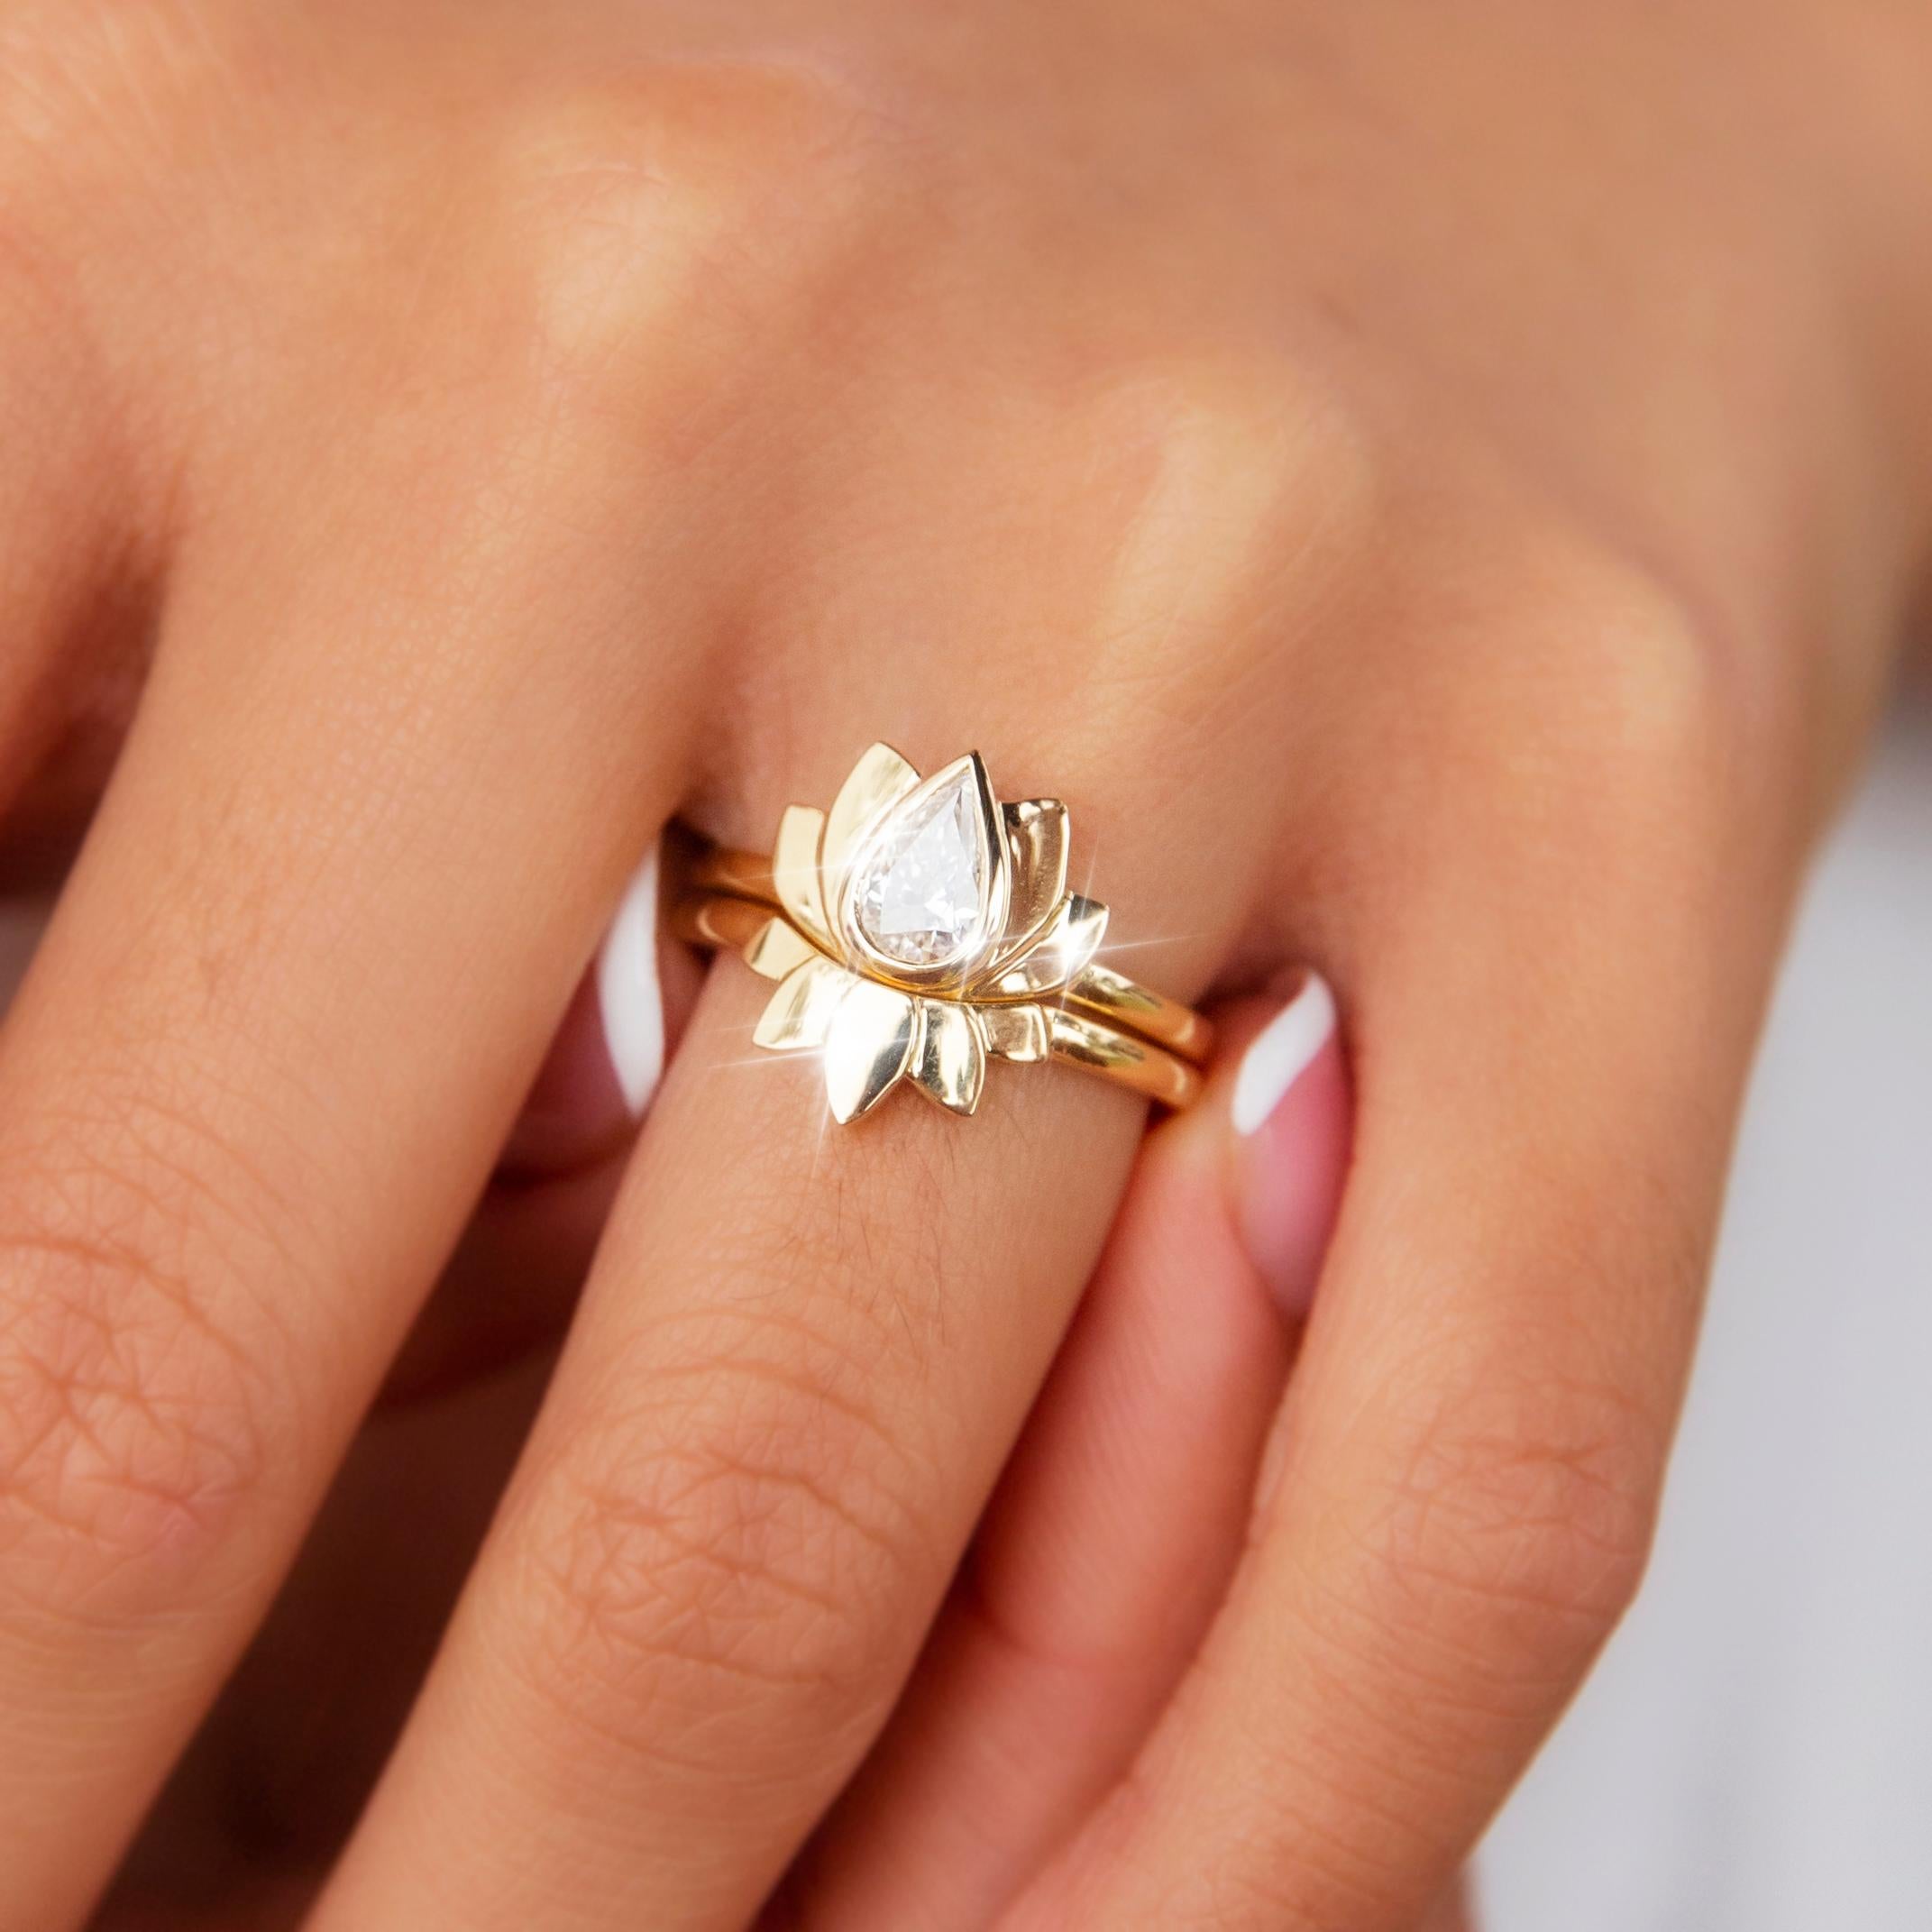 Forged in 18 carat yellow gold, this darling contemporary engagement ring set features a graceful lotus flower holding a certified 0.52 carat pear brilliant cut diamond. This gorgeous two piece set is named The Takeshi Ring. She is a wonderful